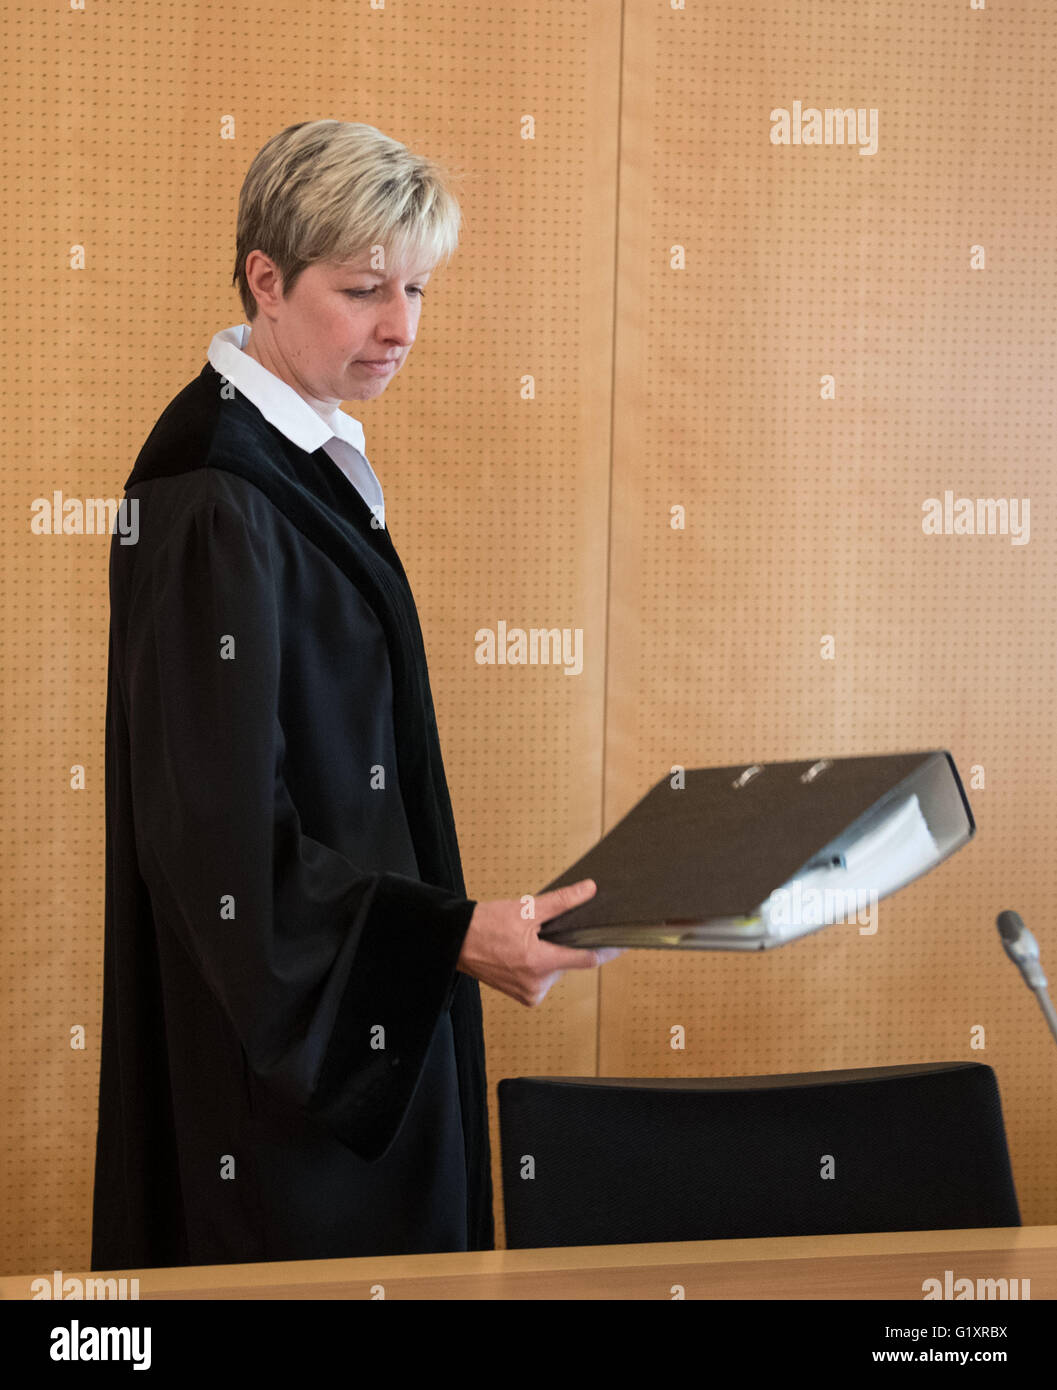 Detmold, Germany. 20th May, 2016. Presiding judge, arrives for a session in the trial against Reinhold Hanning in Detmold, Germany, 20 May 2016. The 94-year-old World War II SS guard is facing a charge of being an accessory to at least 170,000 murders at Auschwitz concentration camp. Prosecutors state that he was a member of the SS 'Totenkopf' (Death's Head) Division and that he was stationed at the Nazi regime's death camp between early 1943 and June 1944. Photo: BERND THISSEN/dpa/Alamy Live News Stock Photo